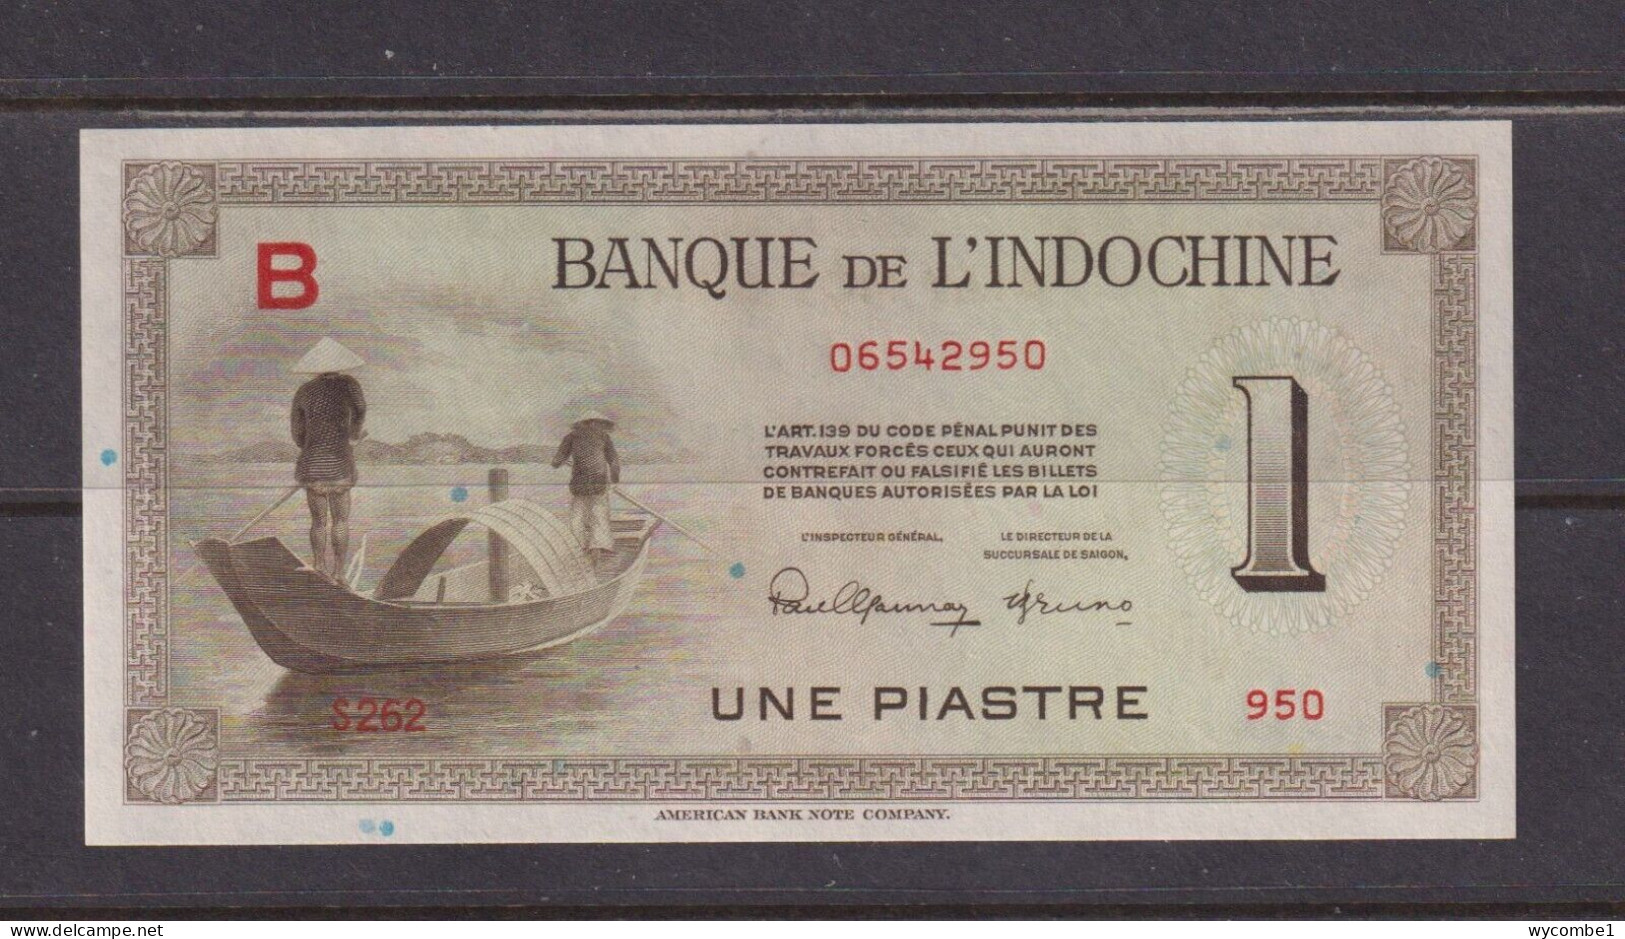 FRENCH INDO CHINA - 1945 1 Piastre AUNC/XF Banknote As Scans - Indochine